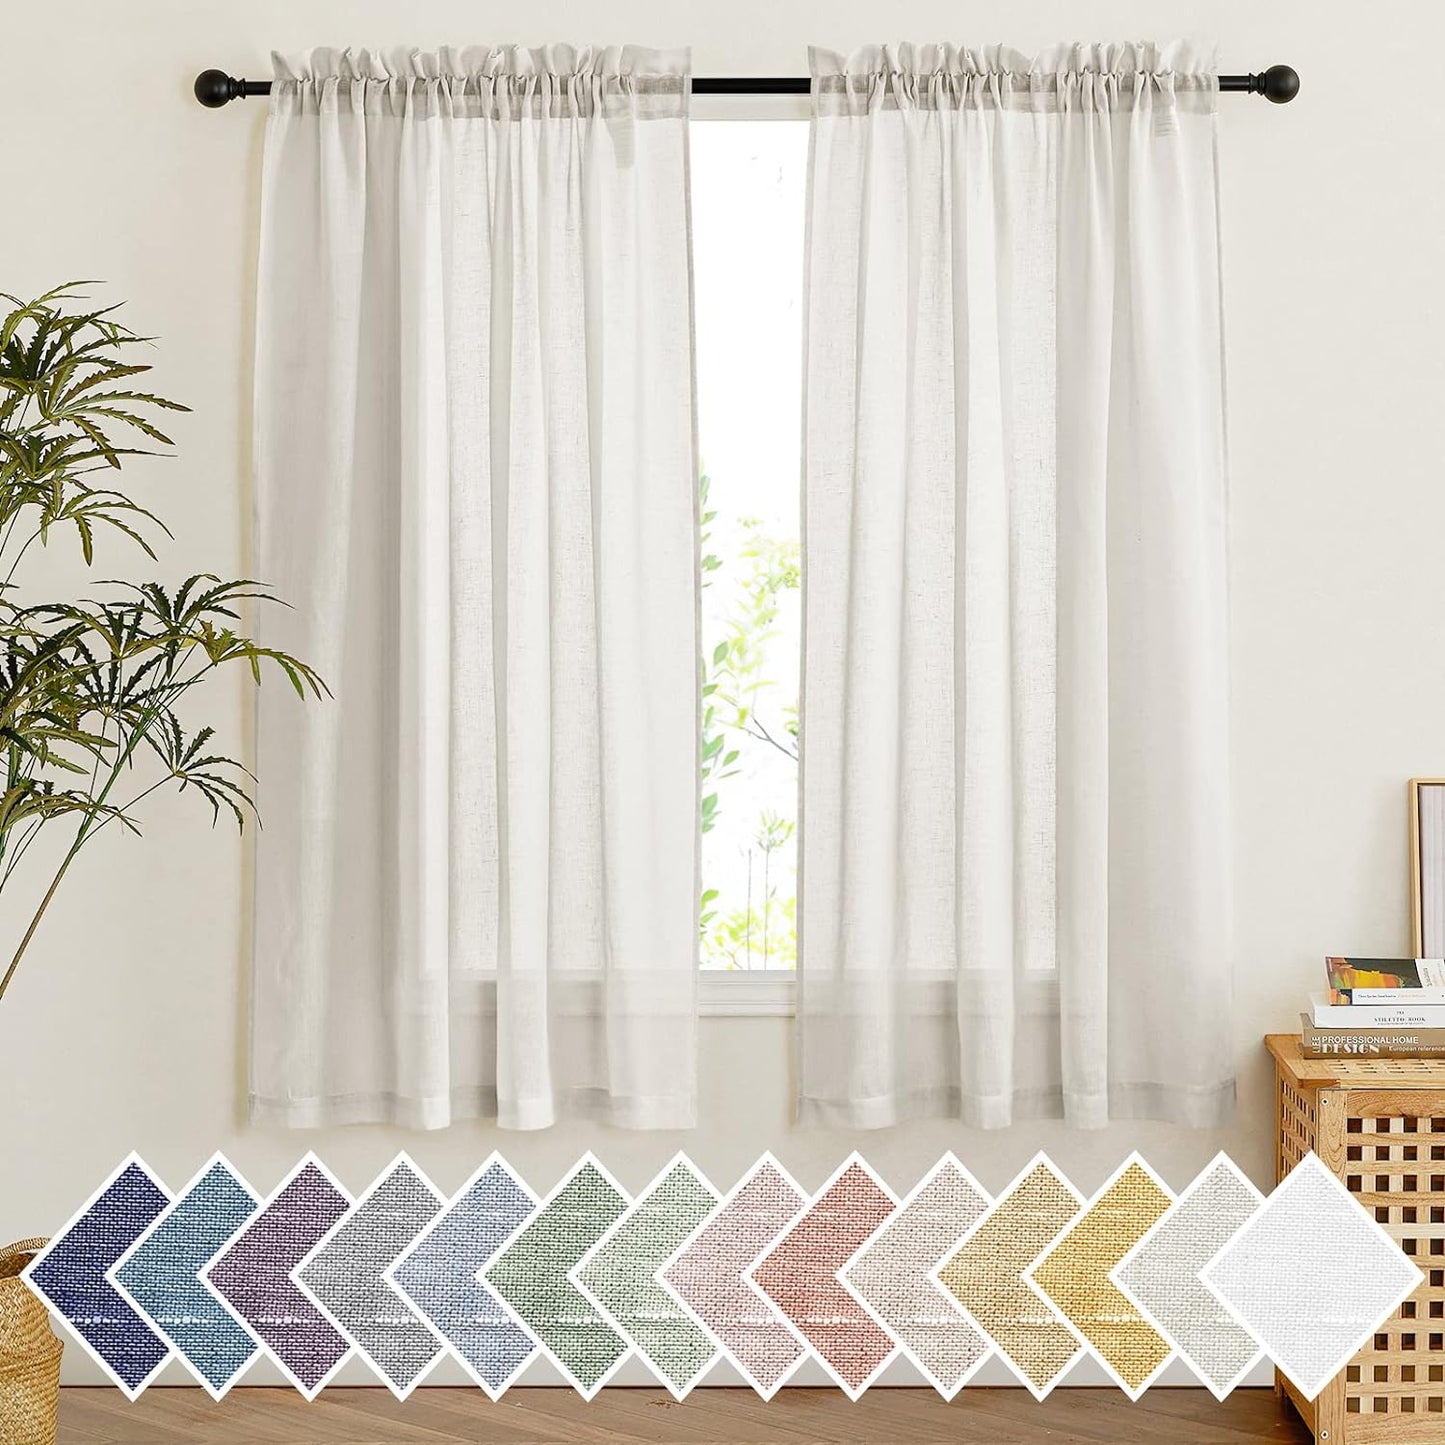 NICETOWN Semi Sheer White Curtains 84 Inch Long, Rod Pocket Sheer Linen Curtains & Drapes Balance Privacy & Light Panels for Bedroom/Living Room, W52 X L84, 2 Panels  NICETOWN Natural W52 X L63 